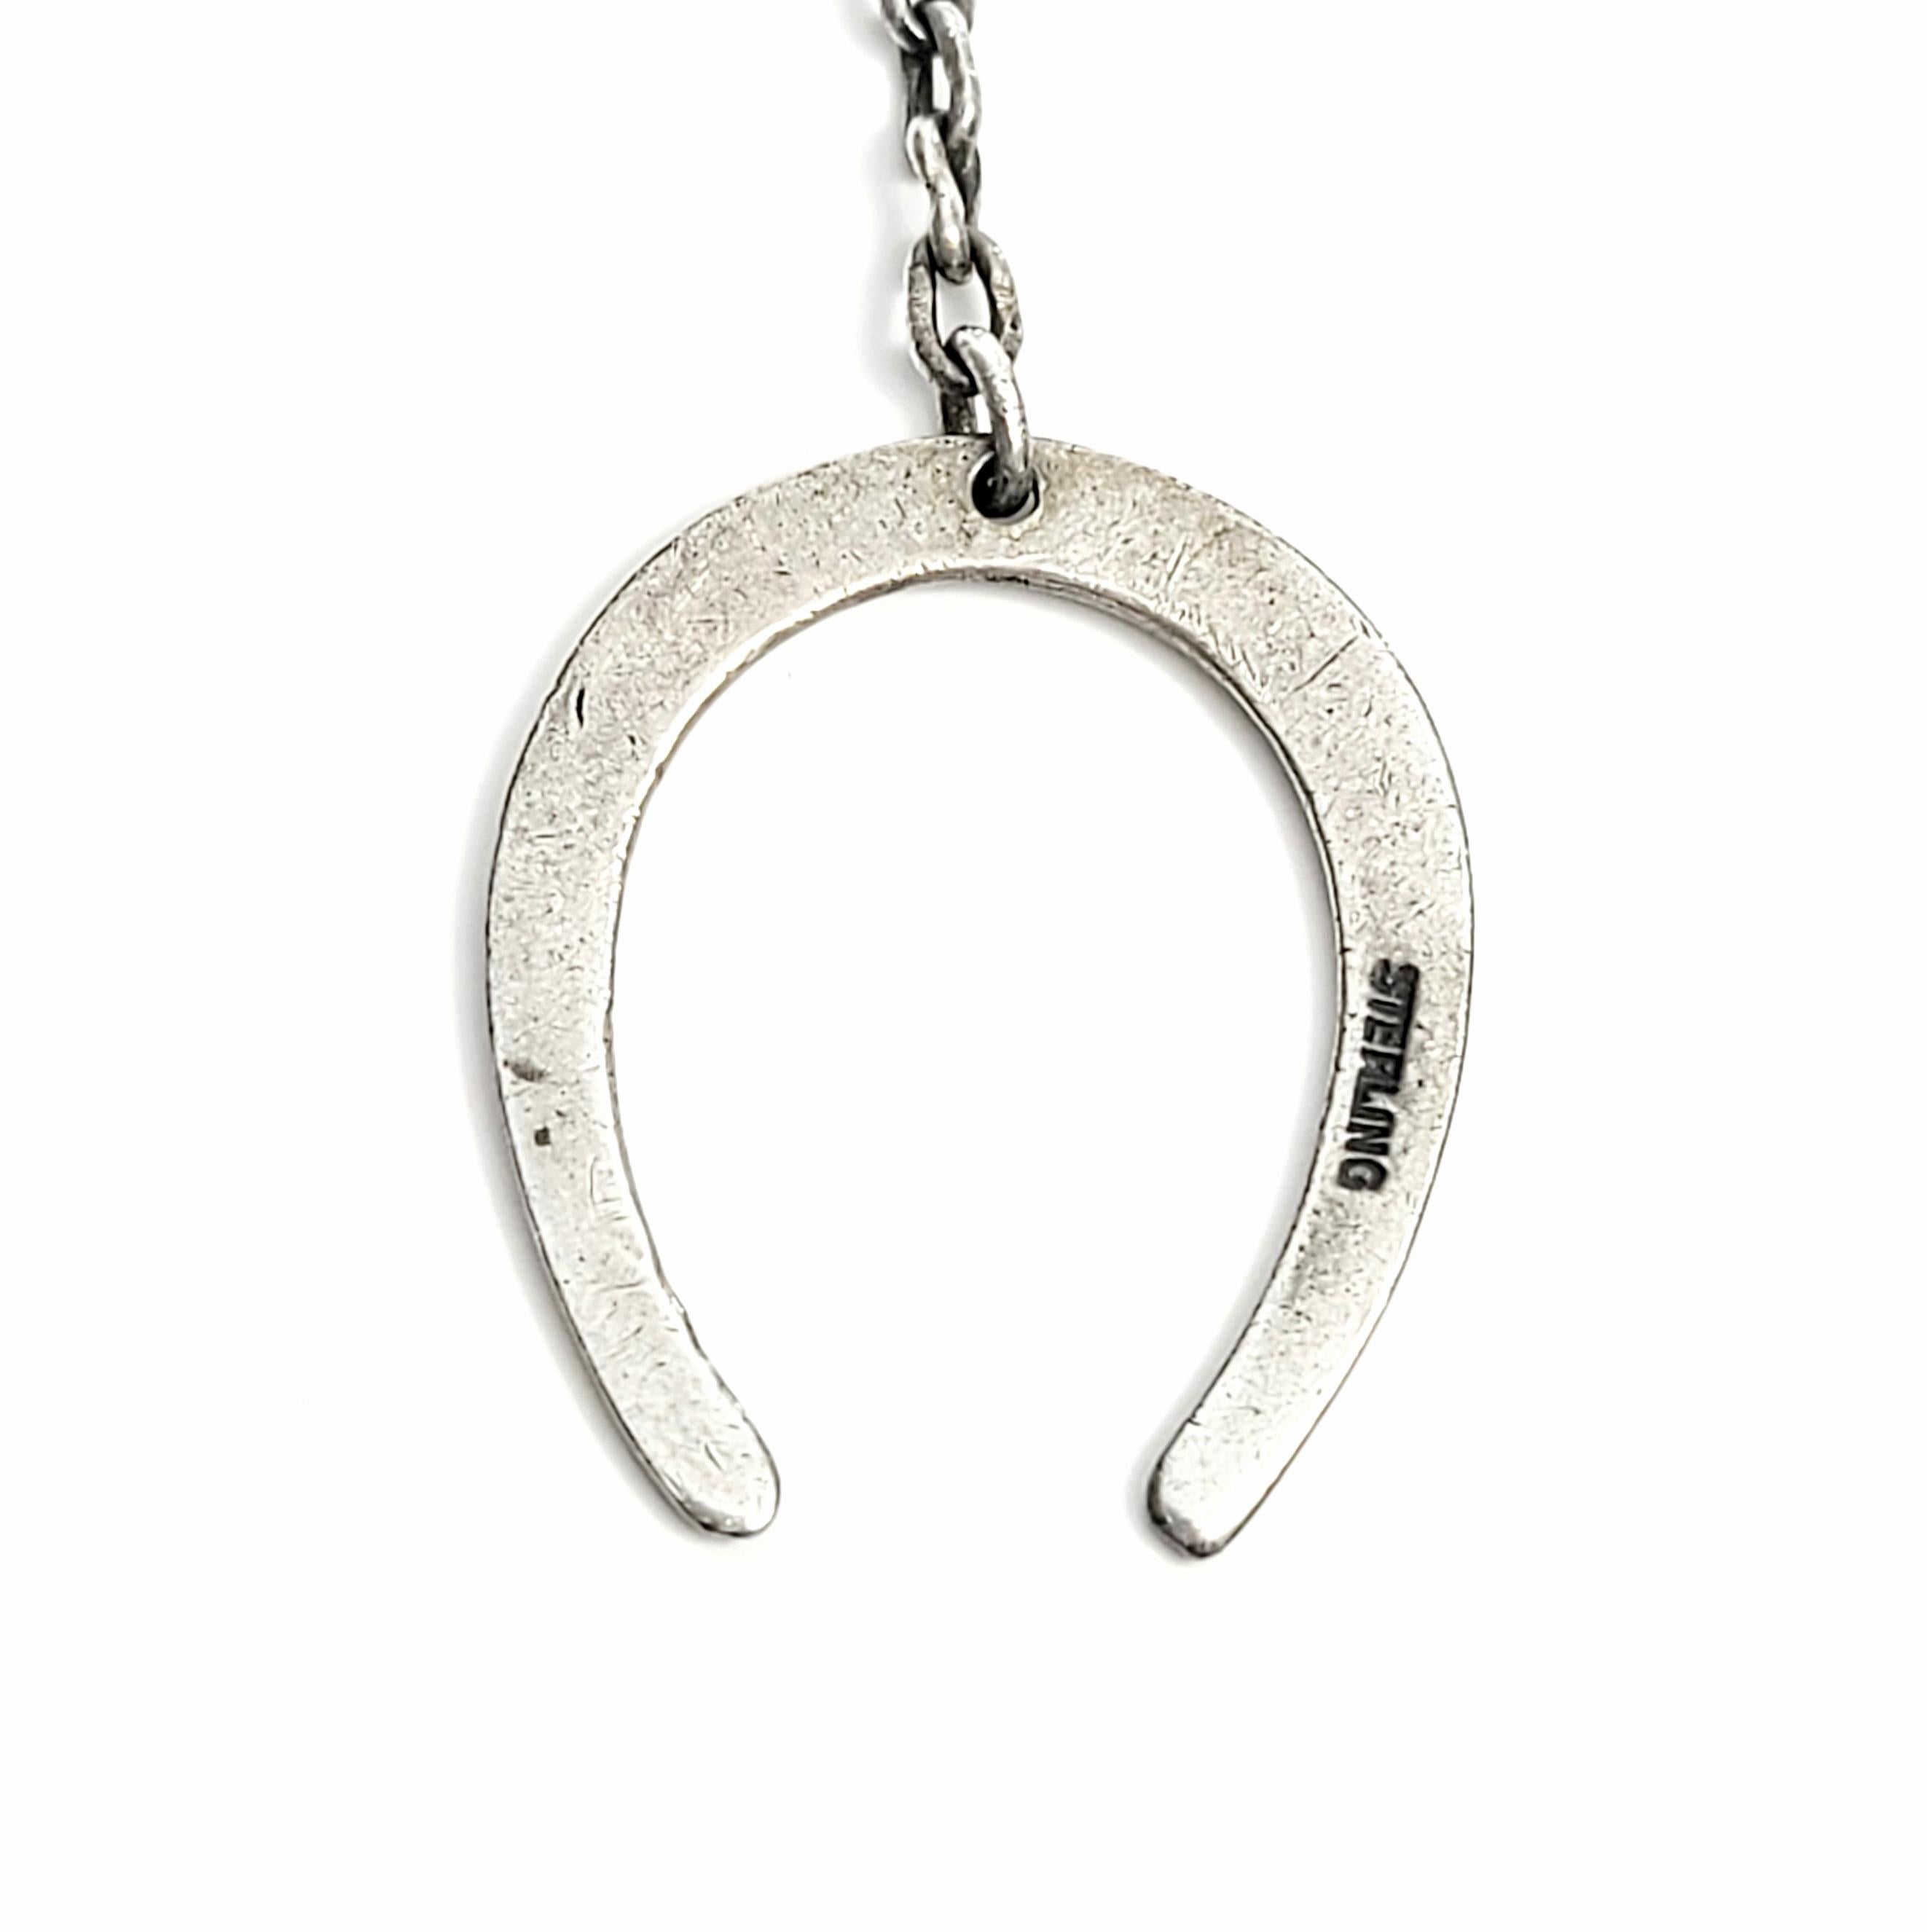 1920's Sterling Silver Dismal Desmond Dog Charm and Horseshoe Fob In Good Condition For Sale In Washington Depot, CT